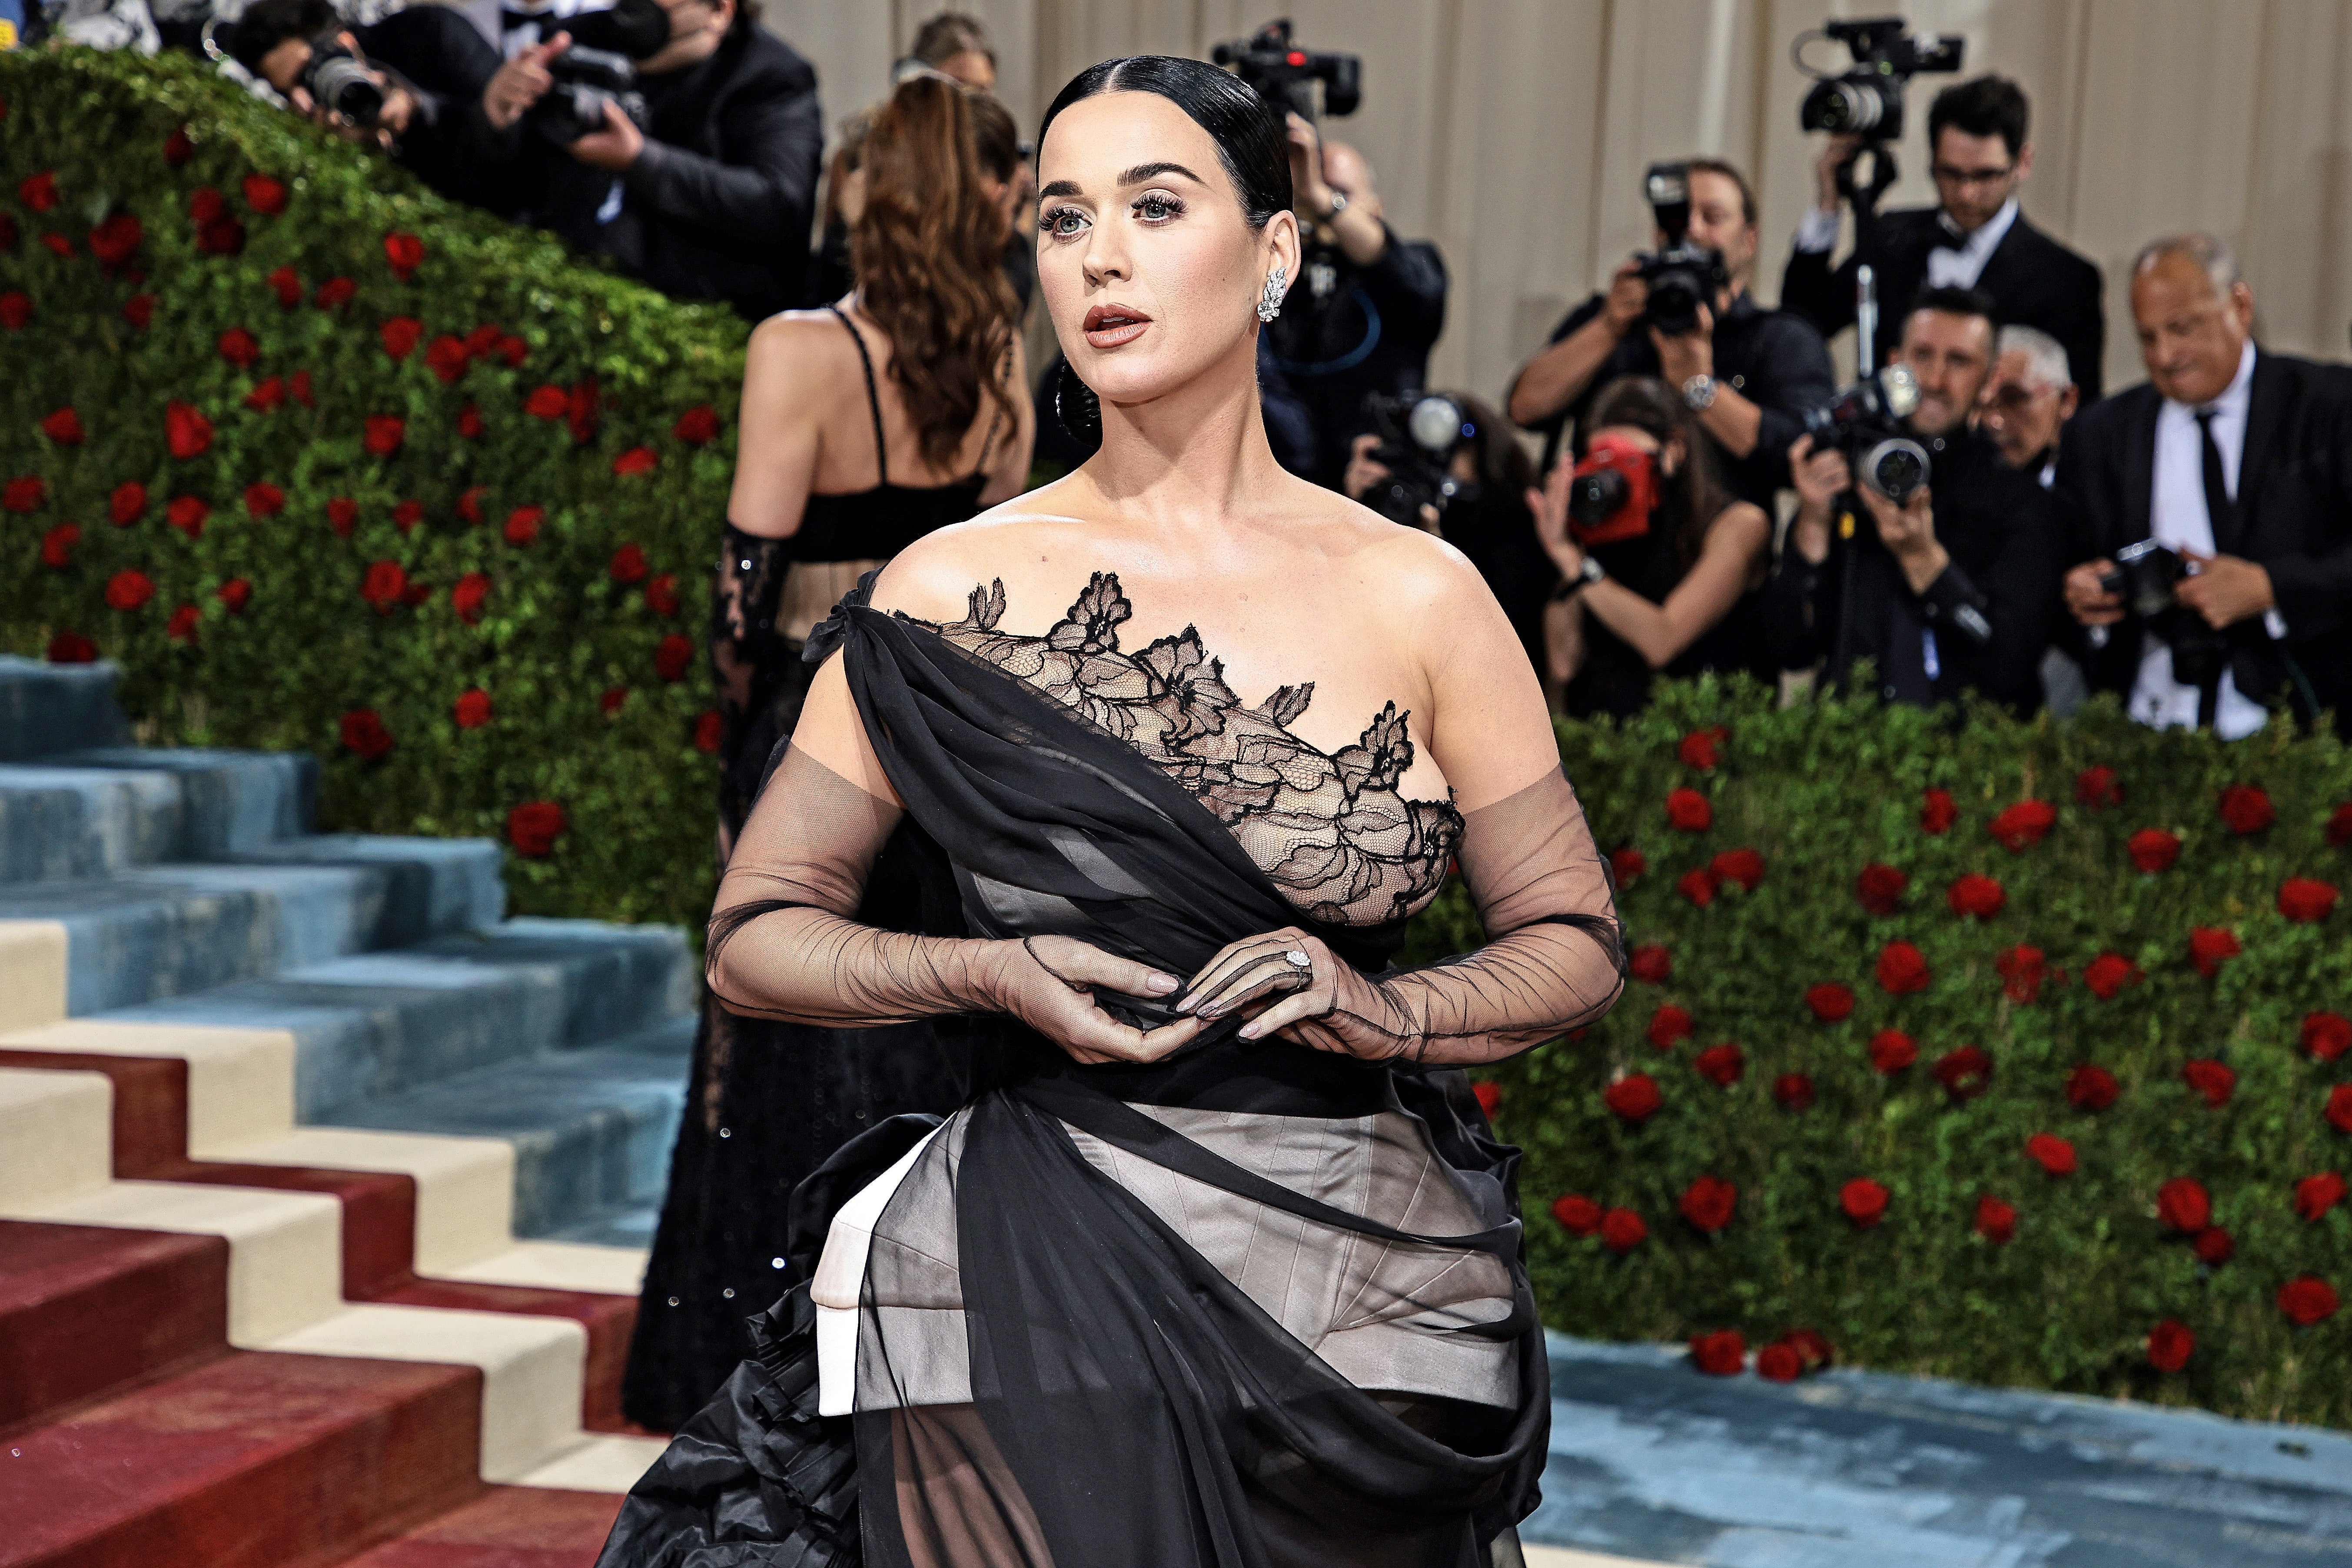 Katy Perry jokes about not being able to use restroom in Met Gala dress |  The Independent